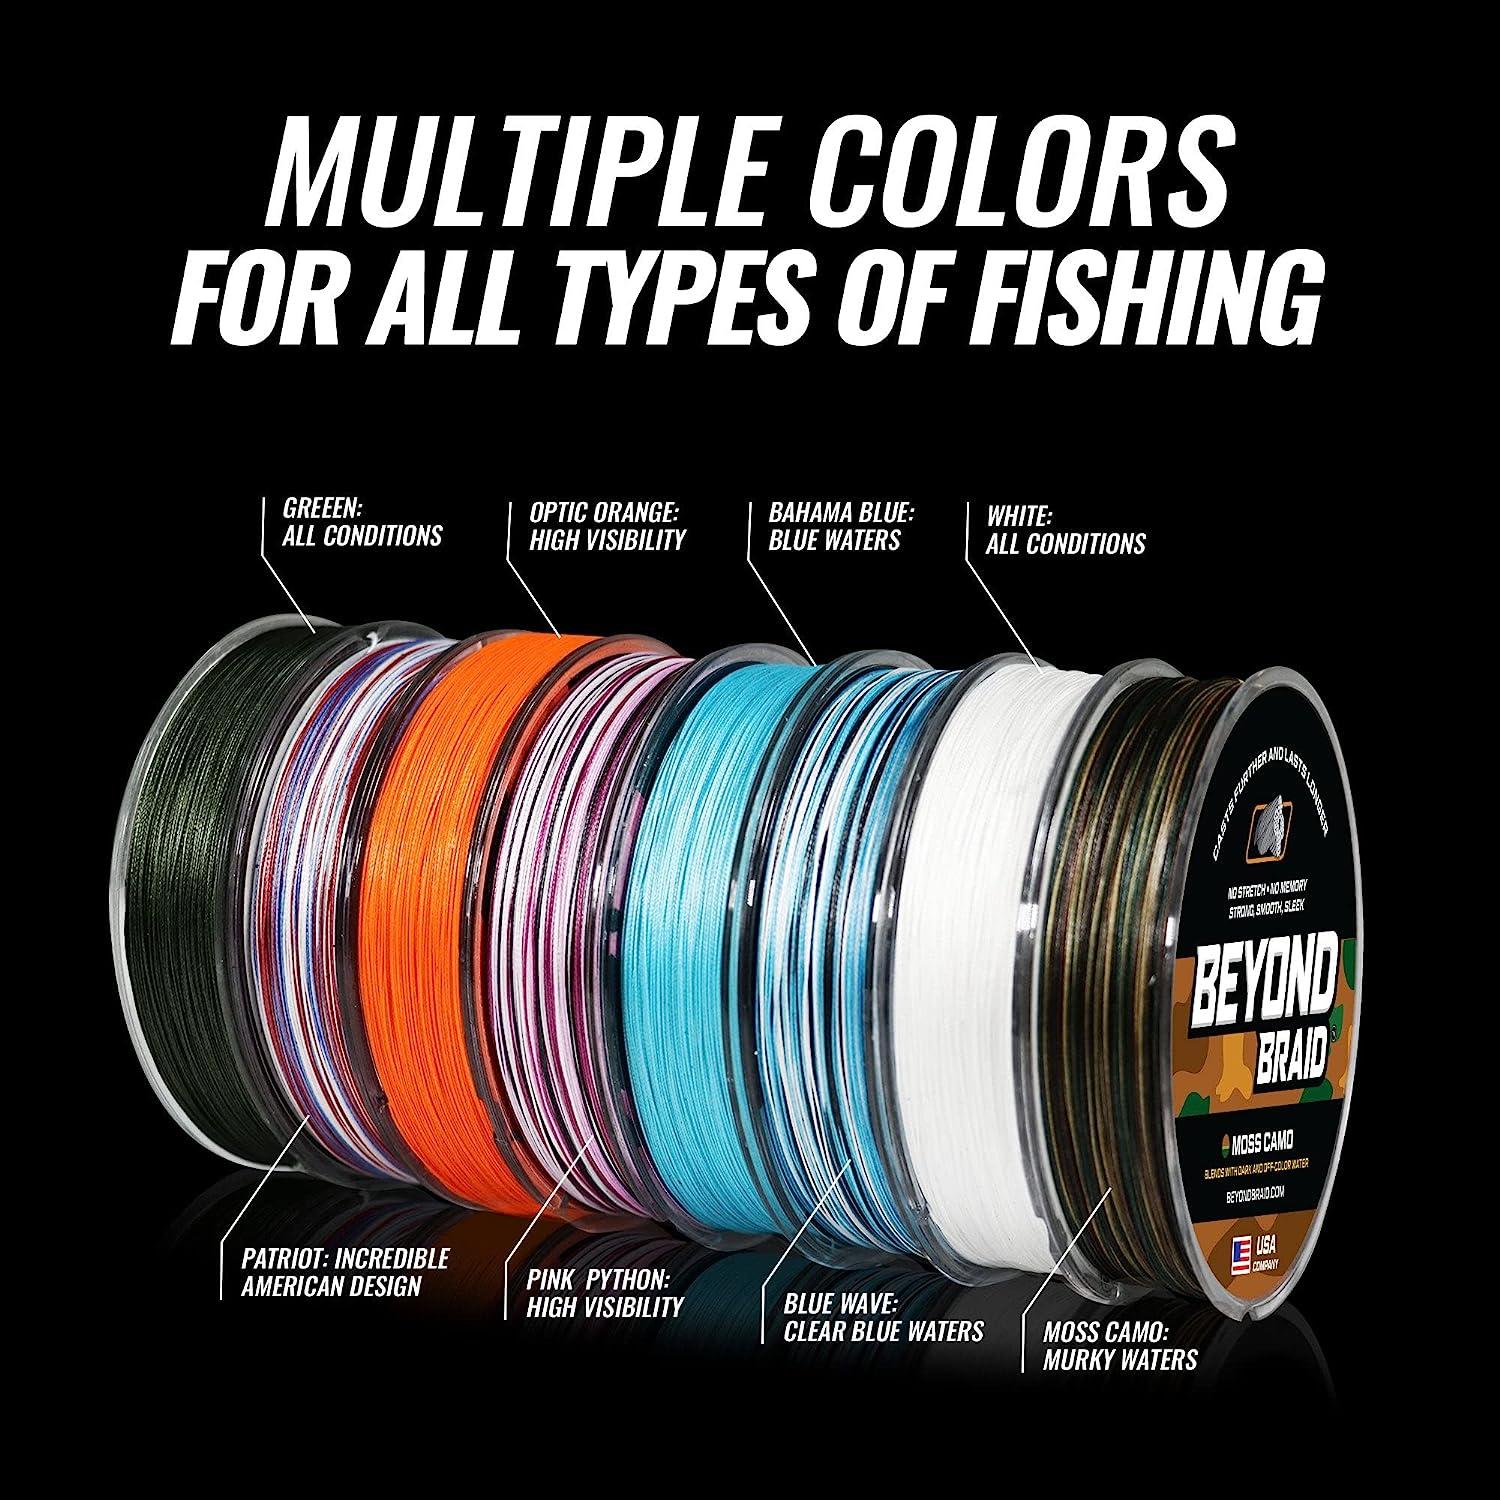 Beyond Braid Braided Fishing Line - Abrasion Resistant - No Stretch - Super  Strong -Blue Camo, Moss Camo, White, Green, Pink, Blue, 4 Strand 8 Strand  Blue Wave 30LB (500 Yards)